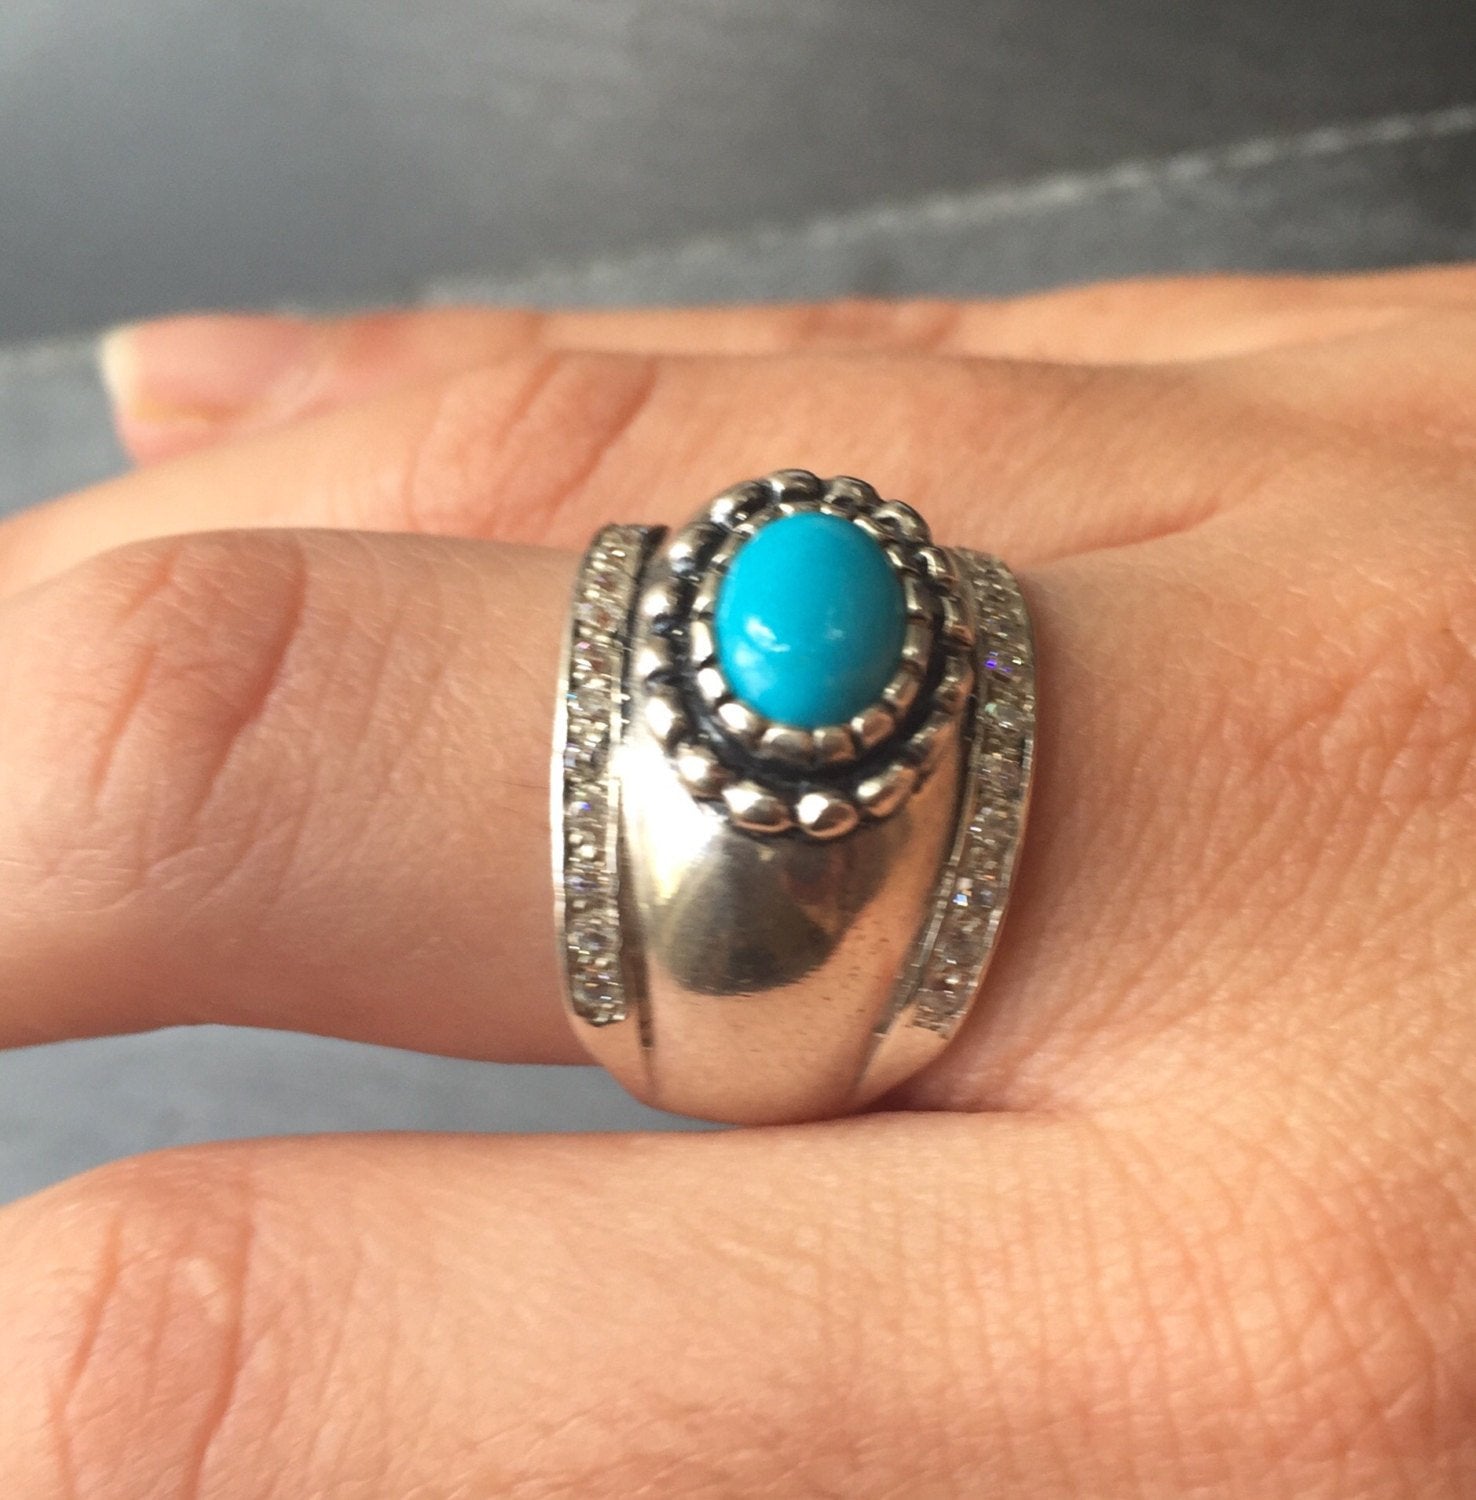 Turquoise Ring, Natural Turquoise, Vintage Ring, Arizona Turquoise, 2 Carats, Bezel Ring, Sleeping Beauty Turquoise, Solid Silver Ring